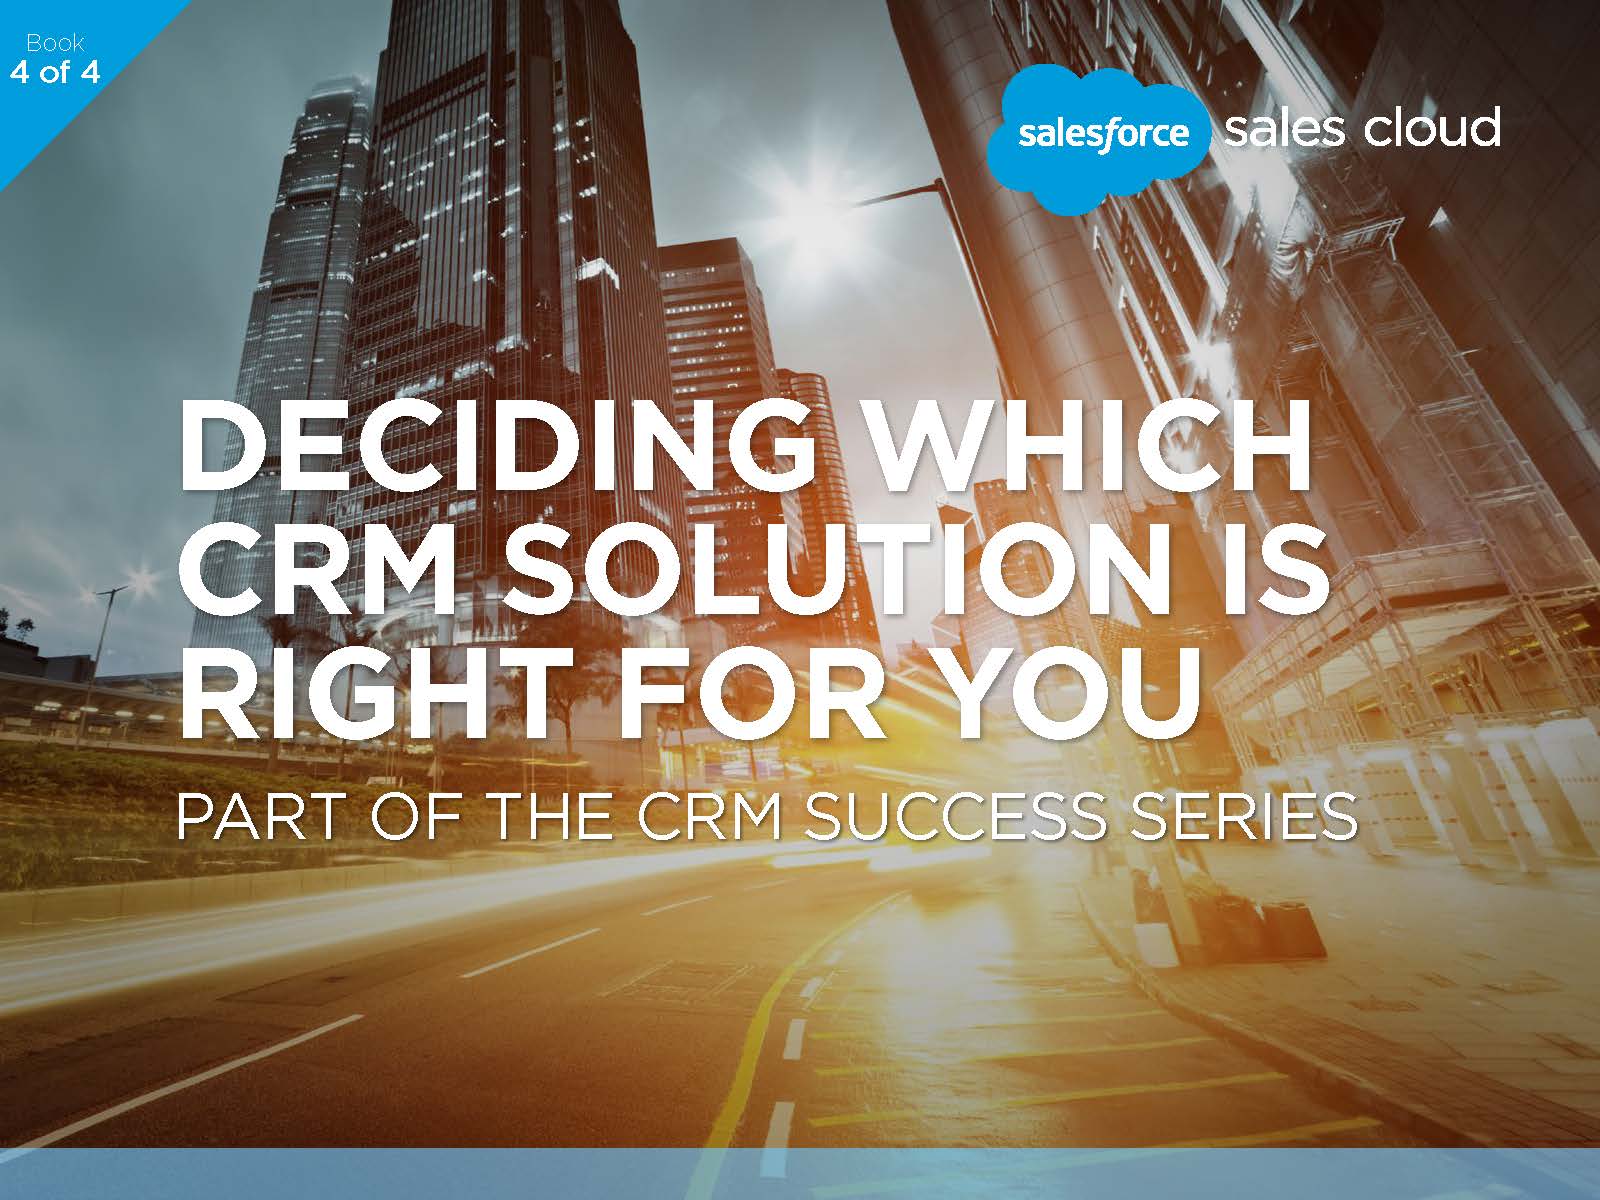 Salesforce-_How_to_Decide_Which_CRM_Solution_is_Right_For_You_Page_01